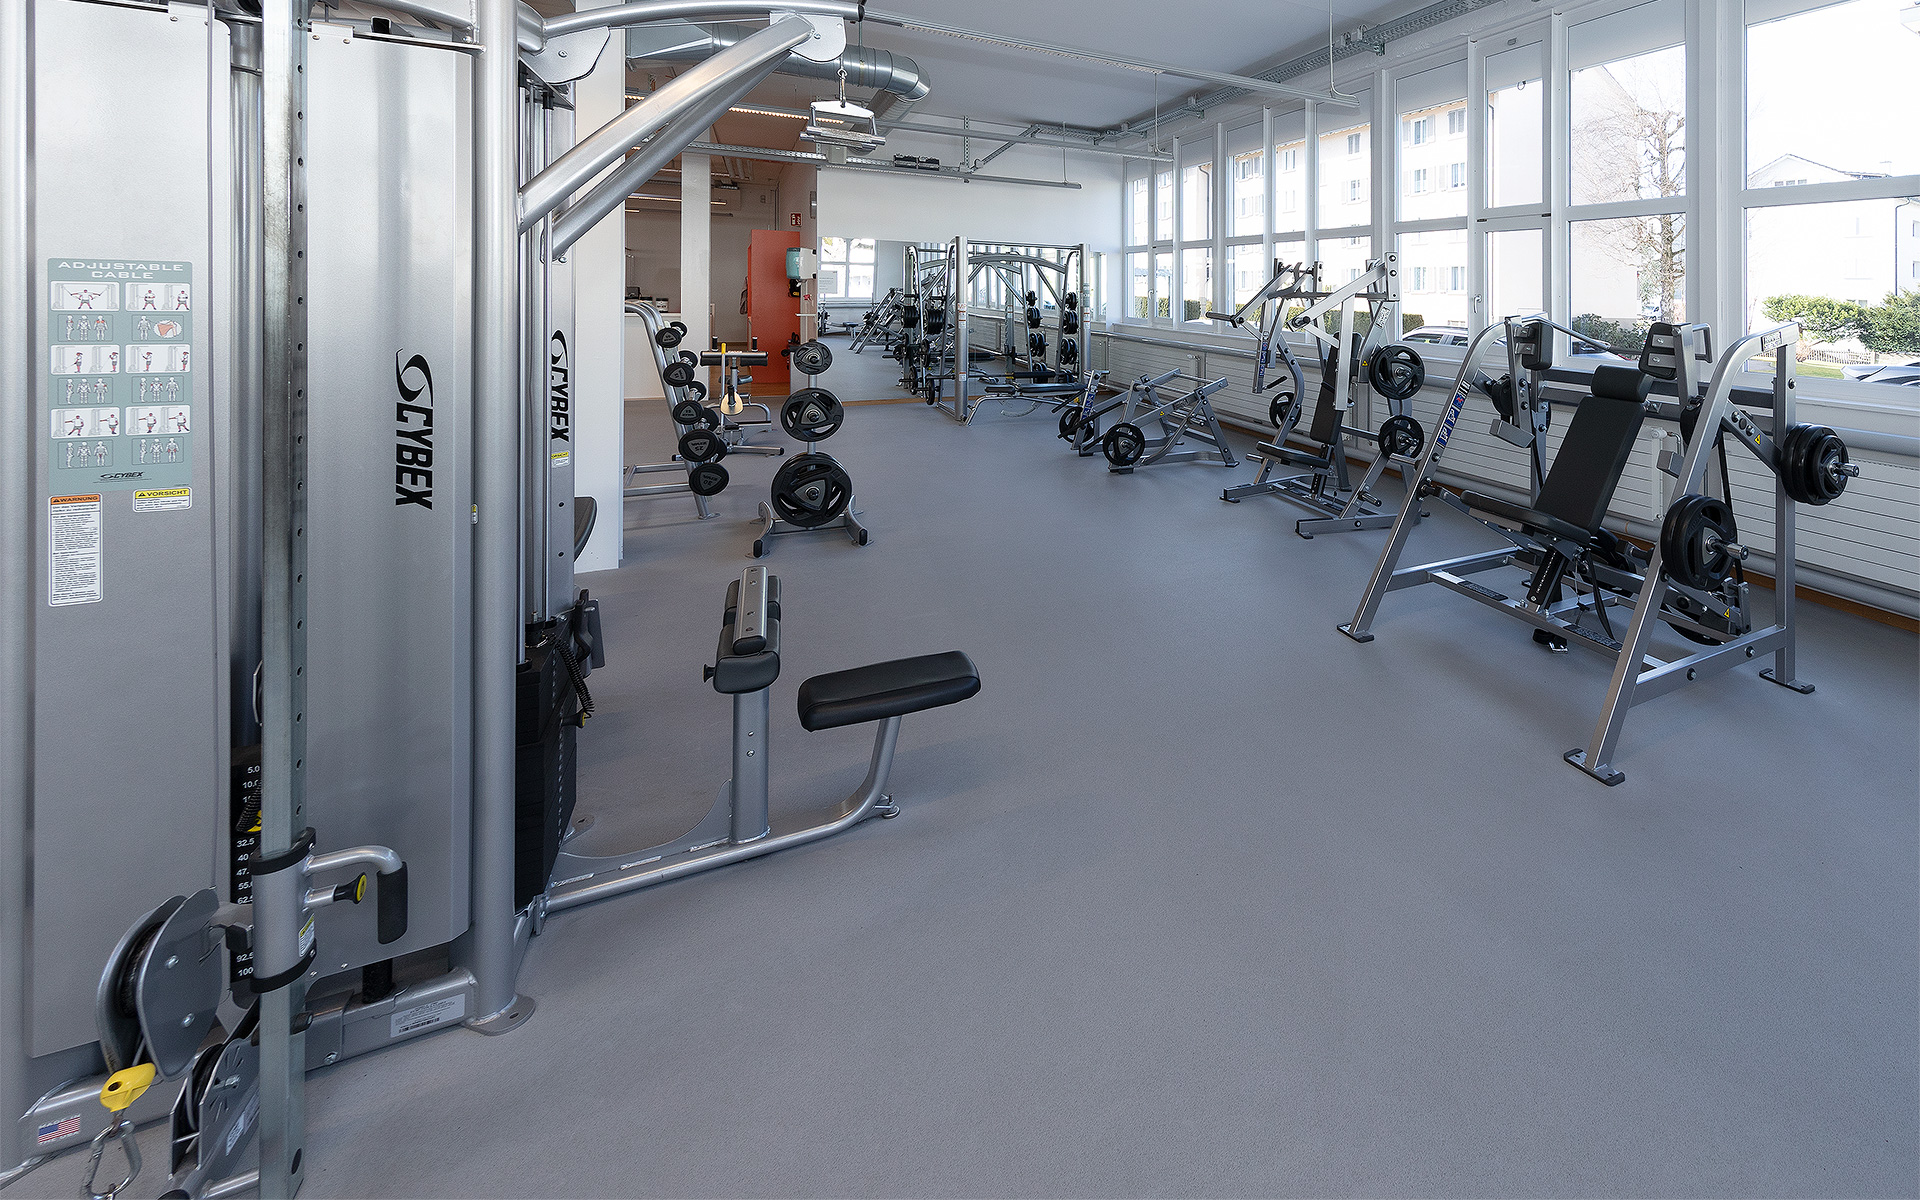 Weight training area with various weight machines and cable pulleys in the ACTIV FITNESS studio in Gossau.